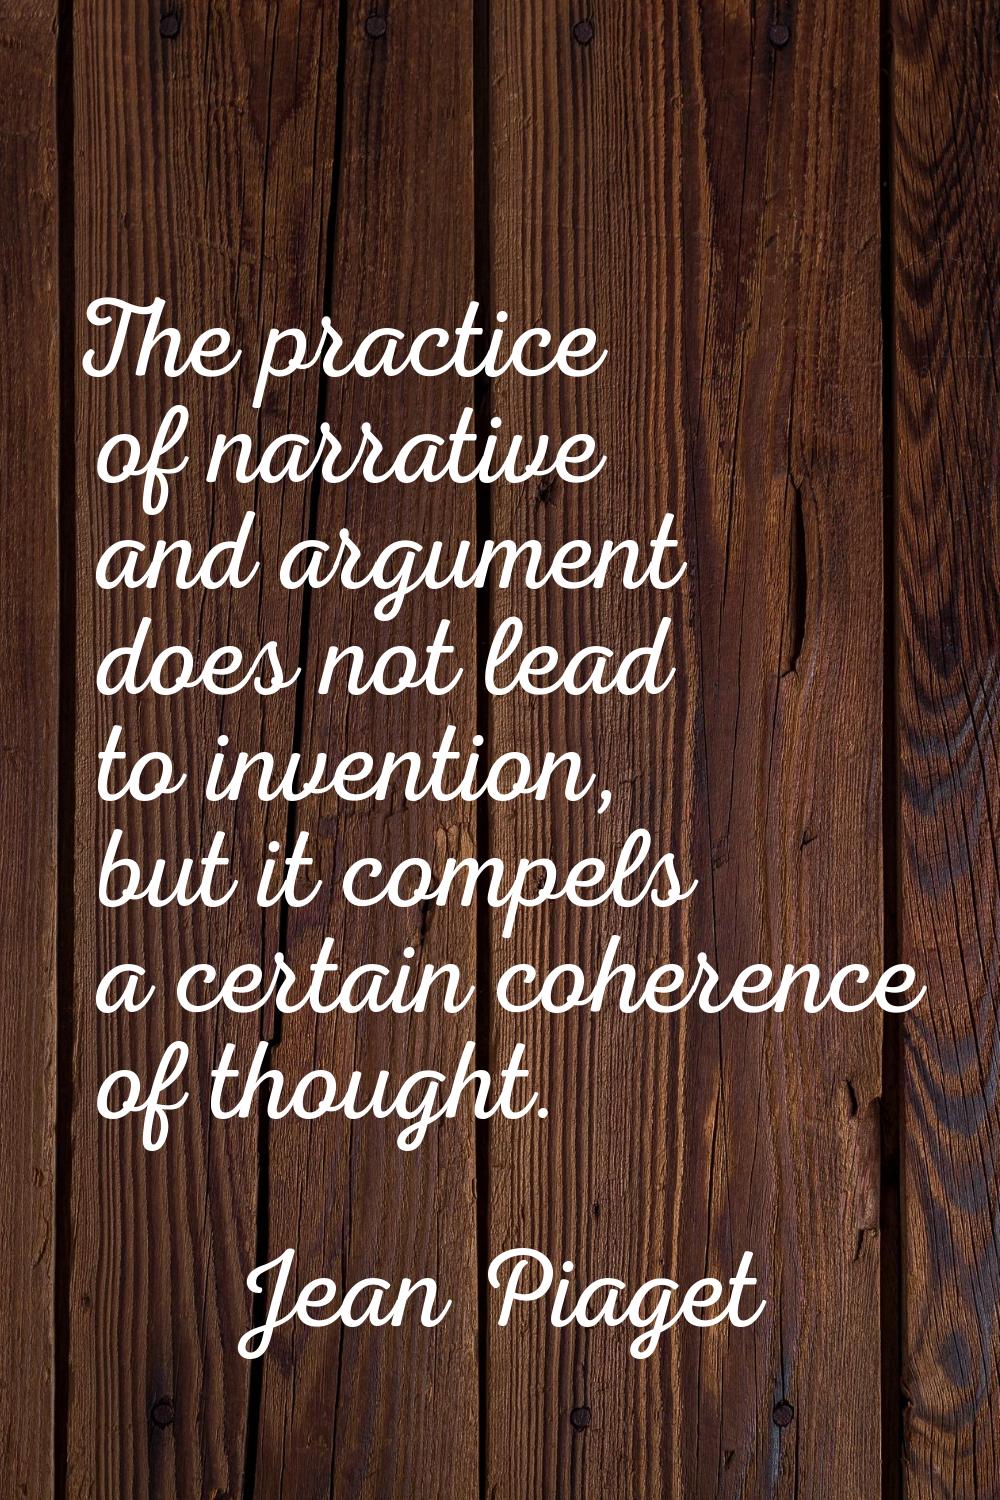 The practice of narrative and argument does not lead to invention, but it compels a certain coheren